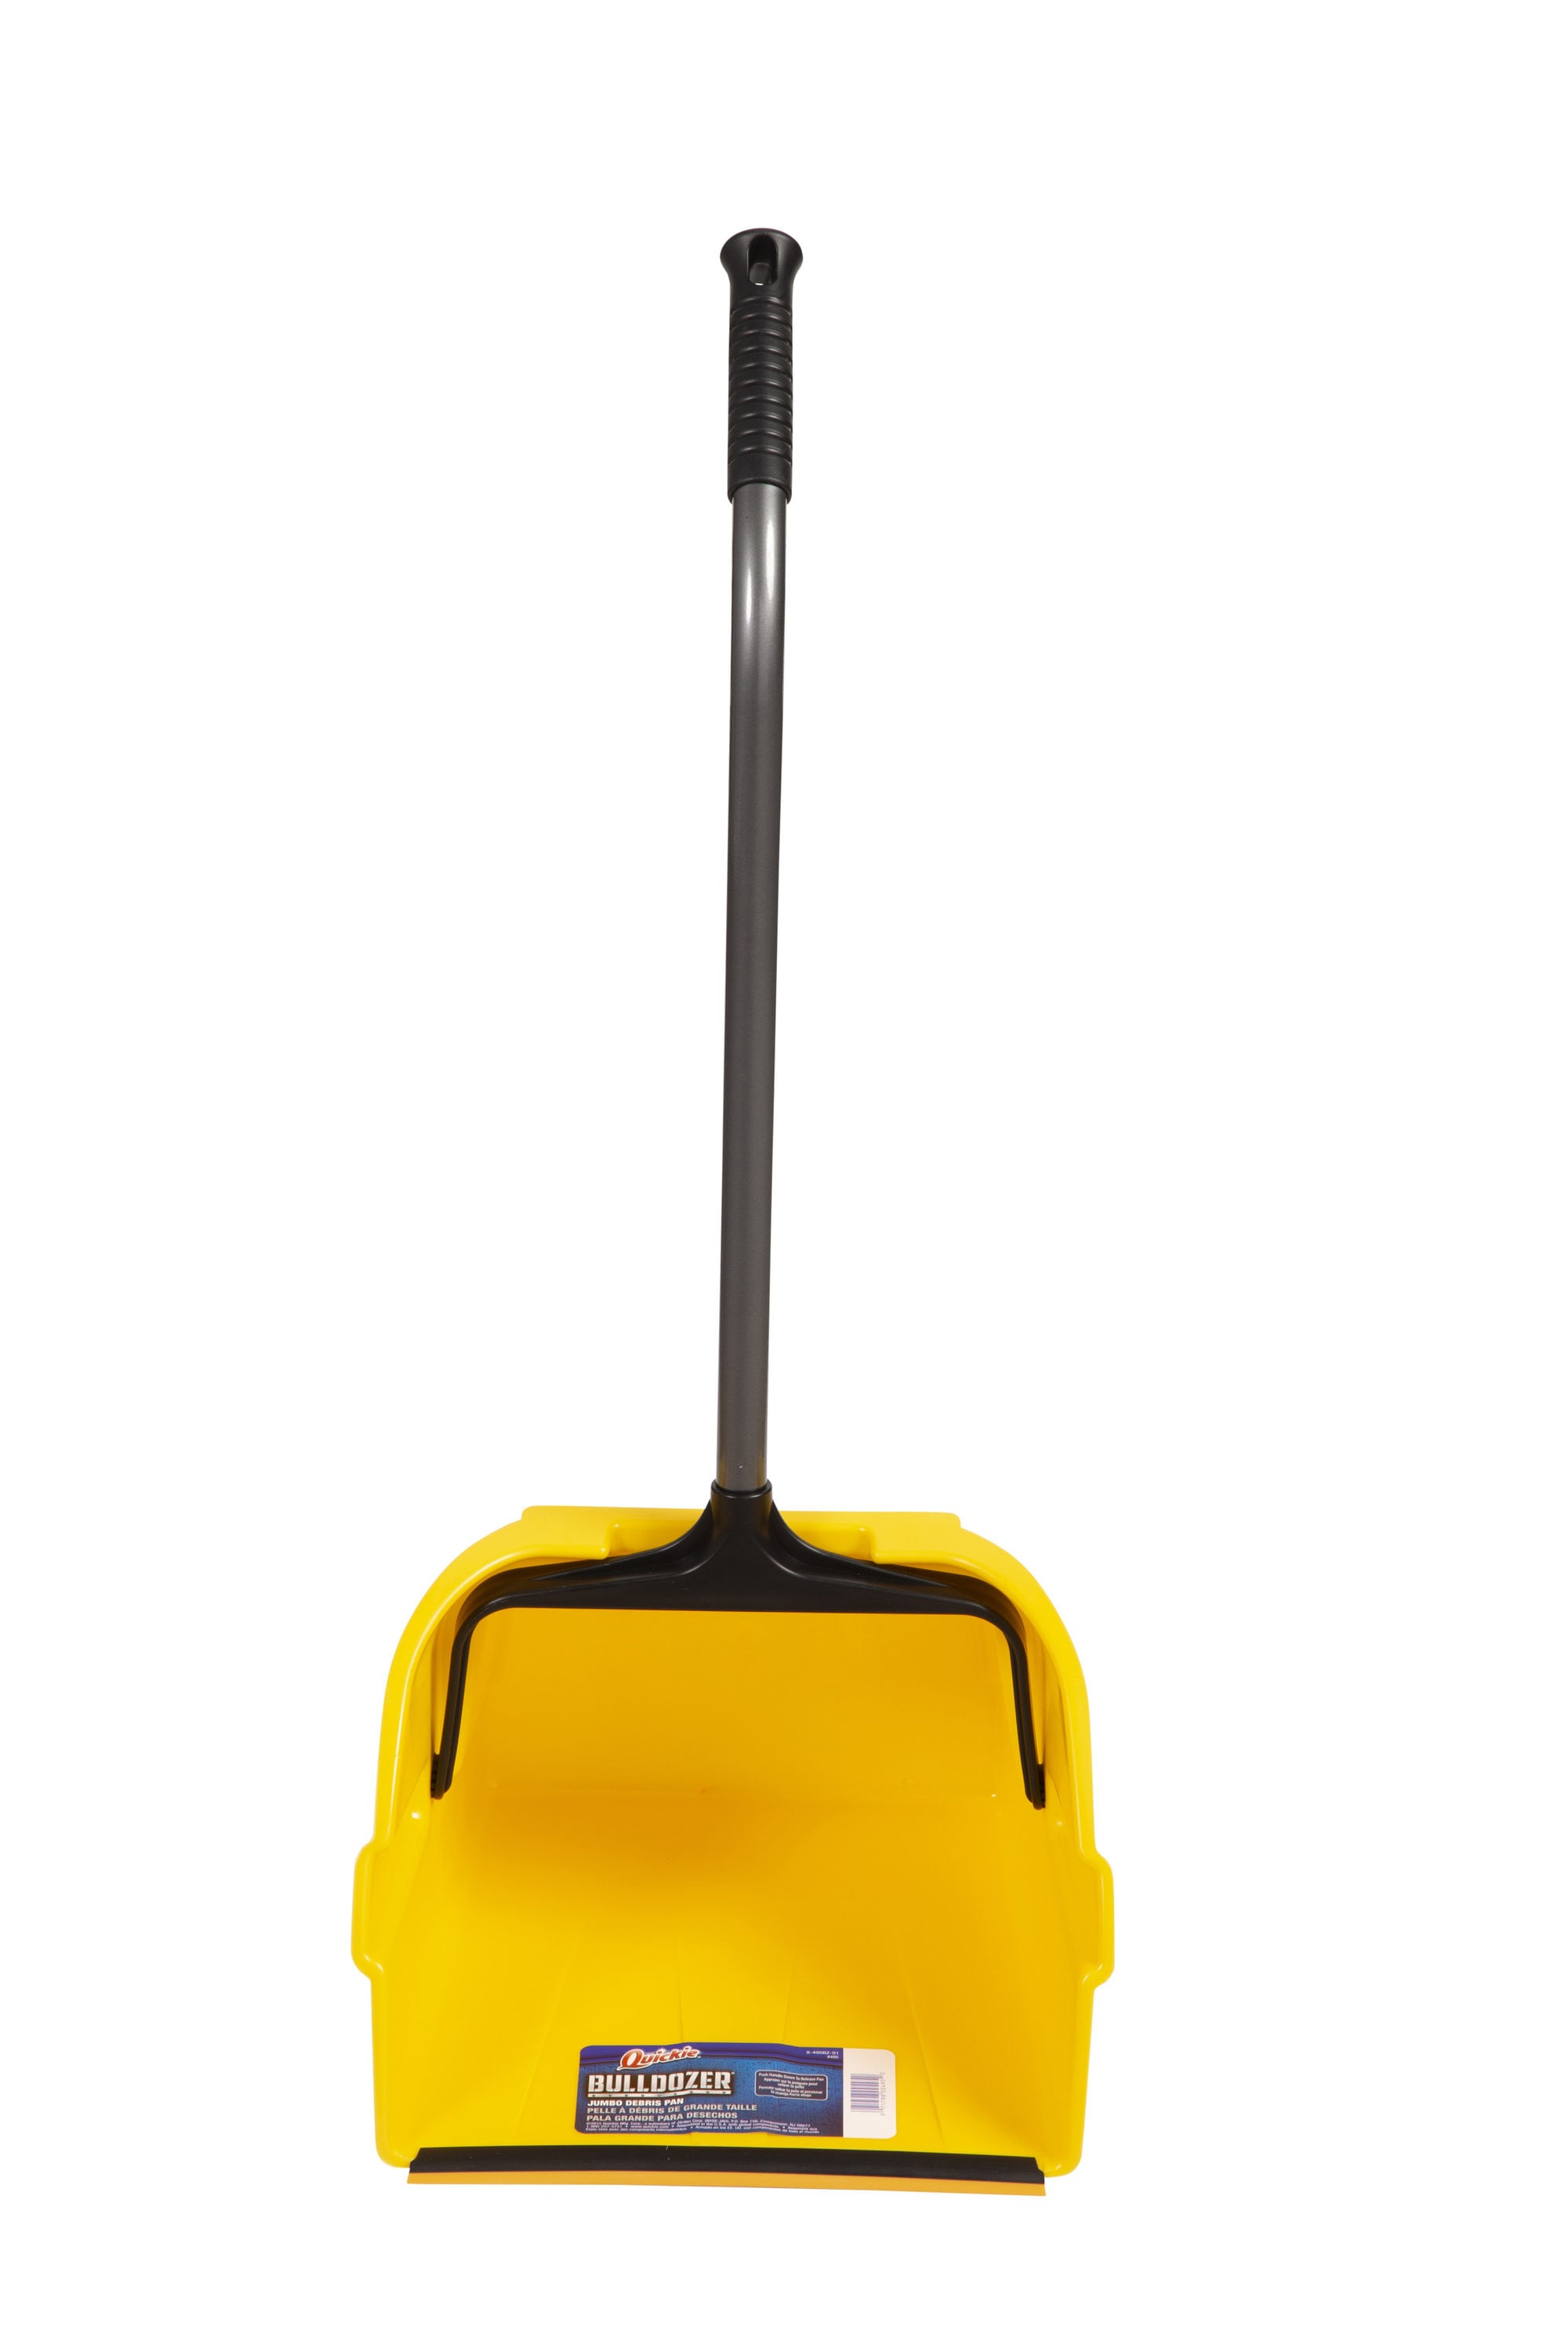 Handy Pan - Yellow - Large Capacity Heavy Duty Dust Pan | Made in USA!  Great for Home, Shop, Garage